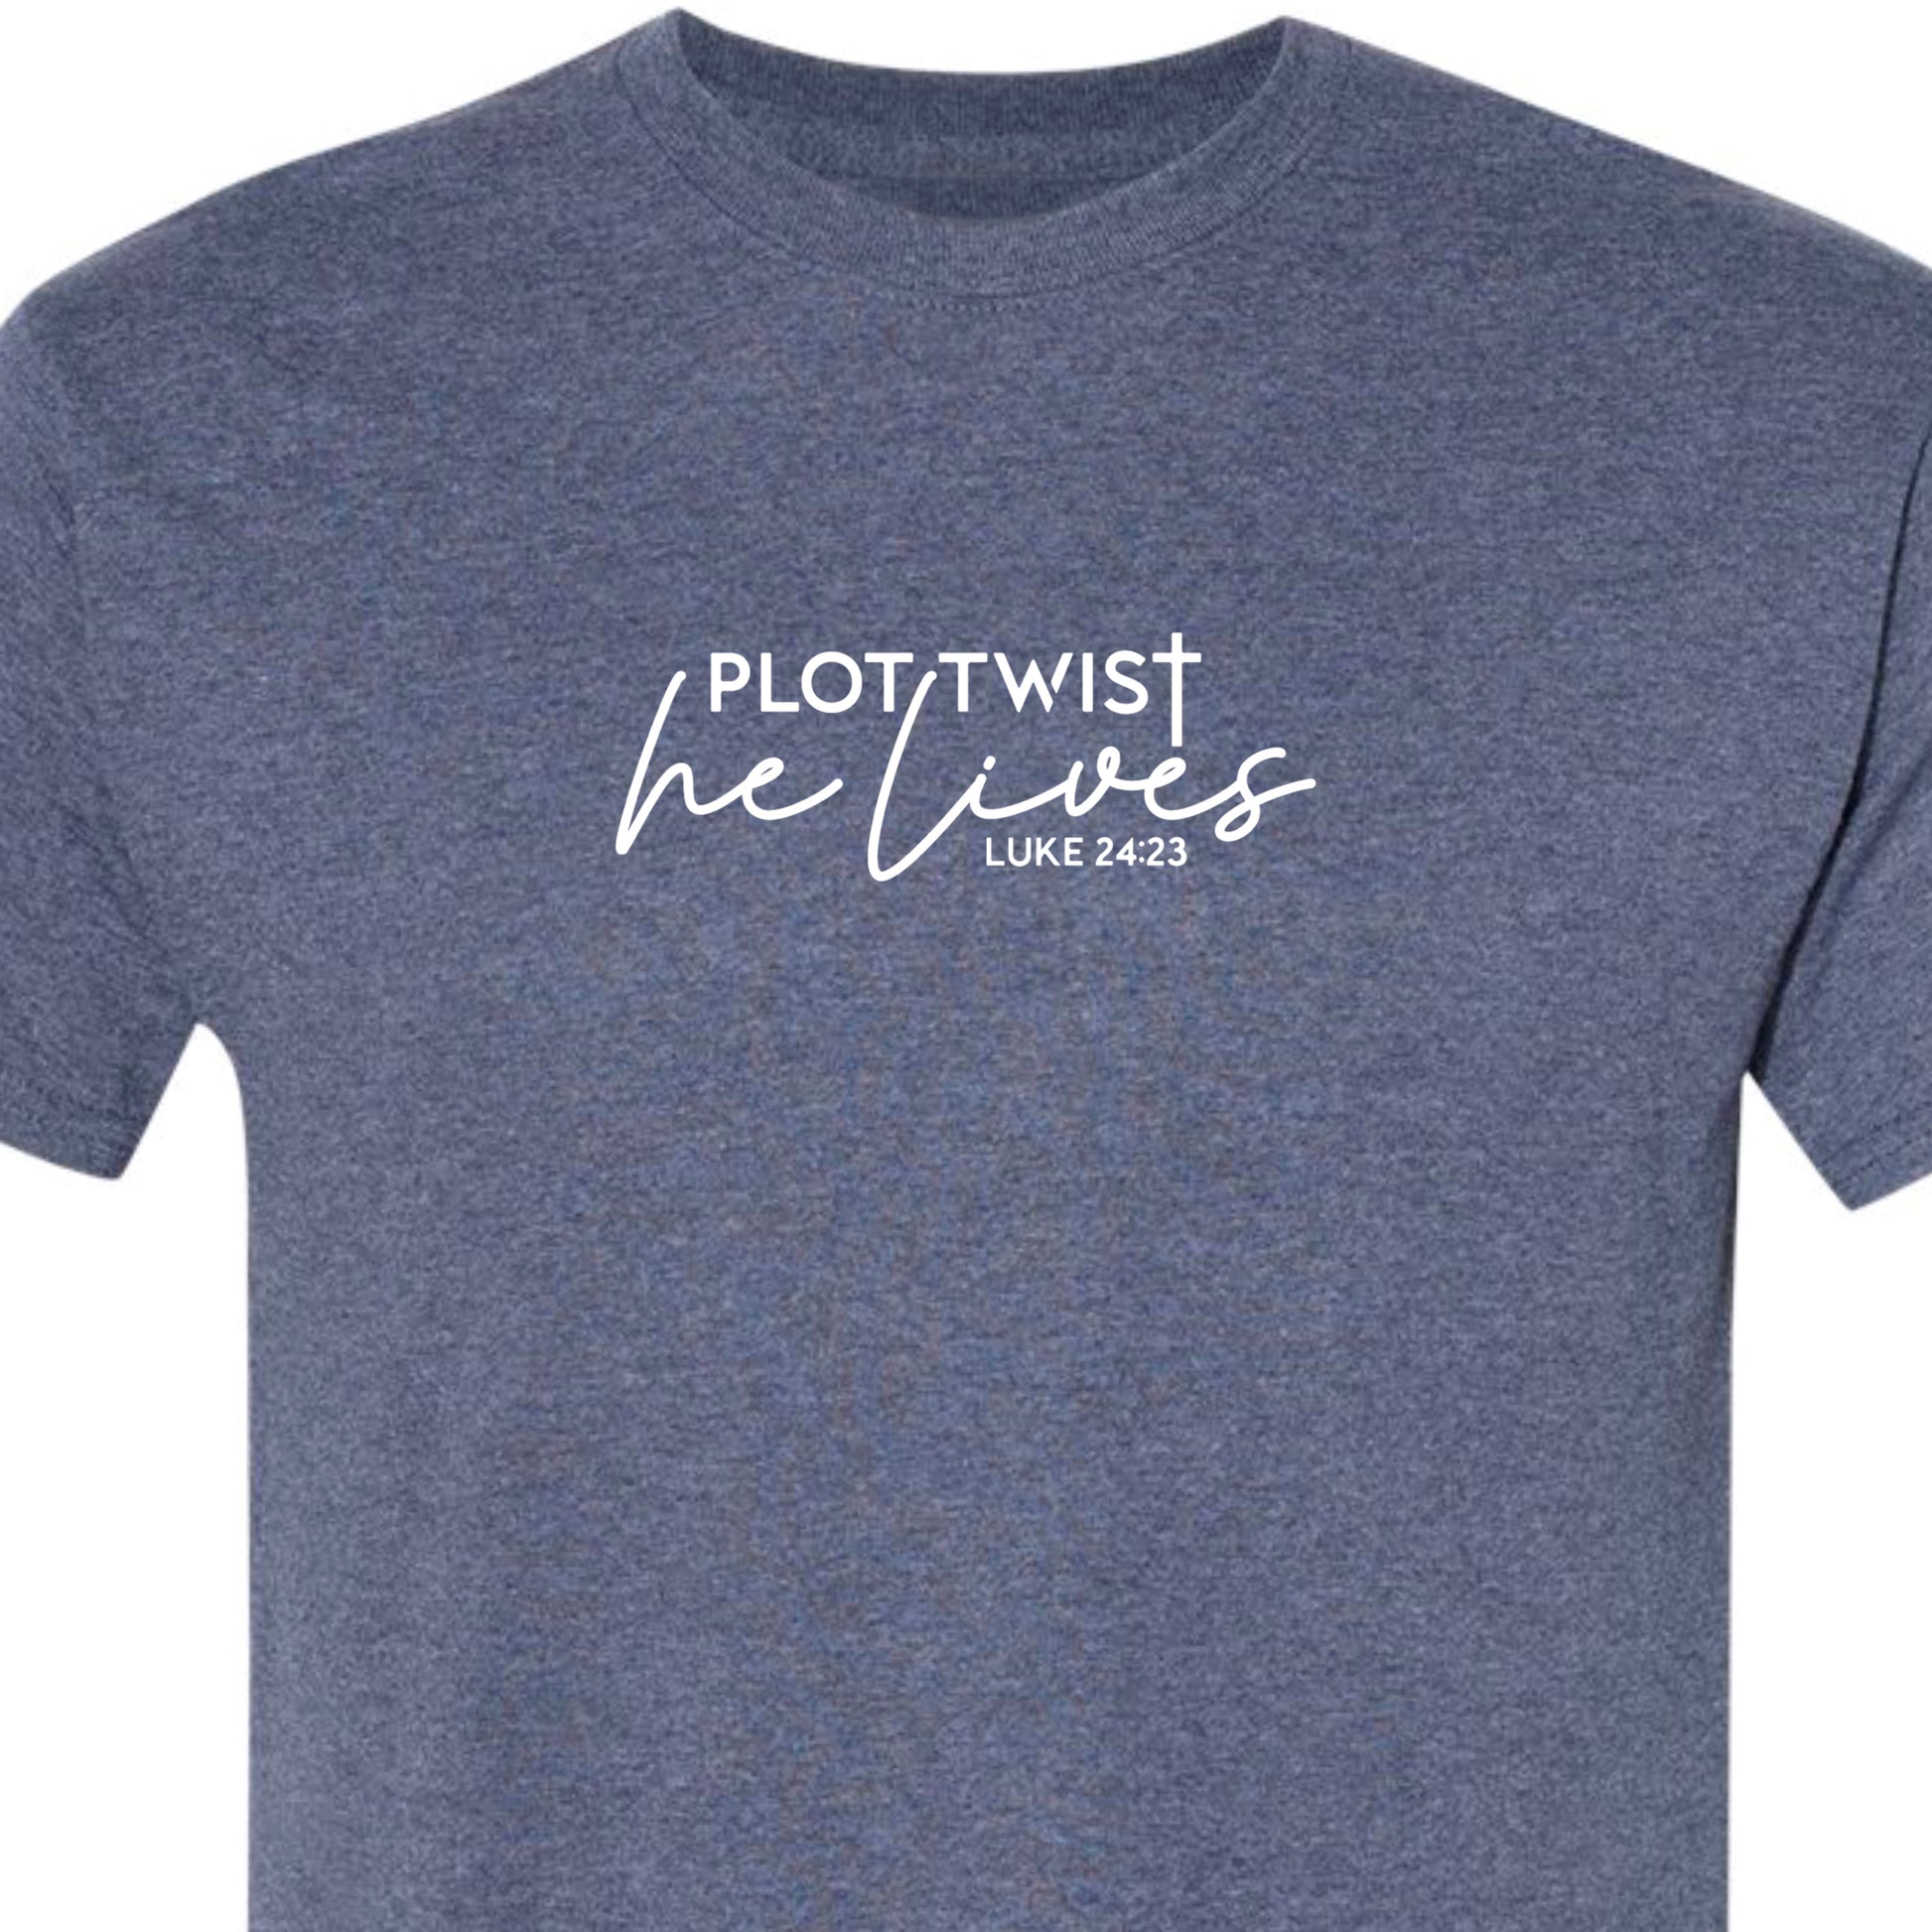 Heather navy adult tshirt that reads, in white lettering: Plot Twist, He Lives - Luke 24:23